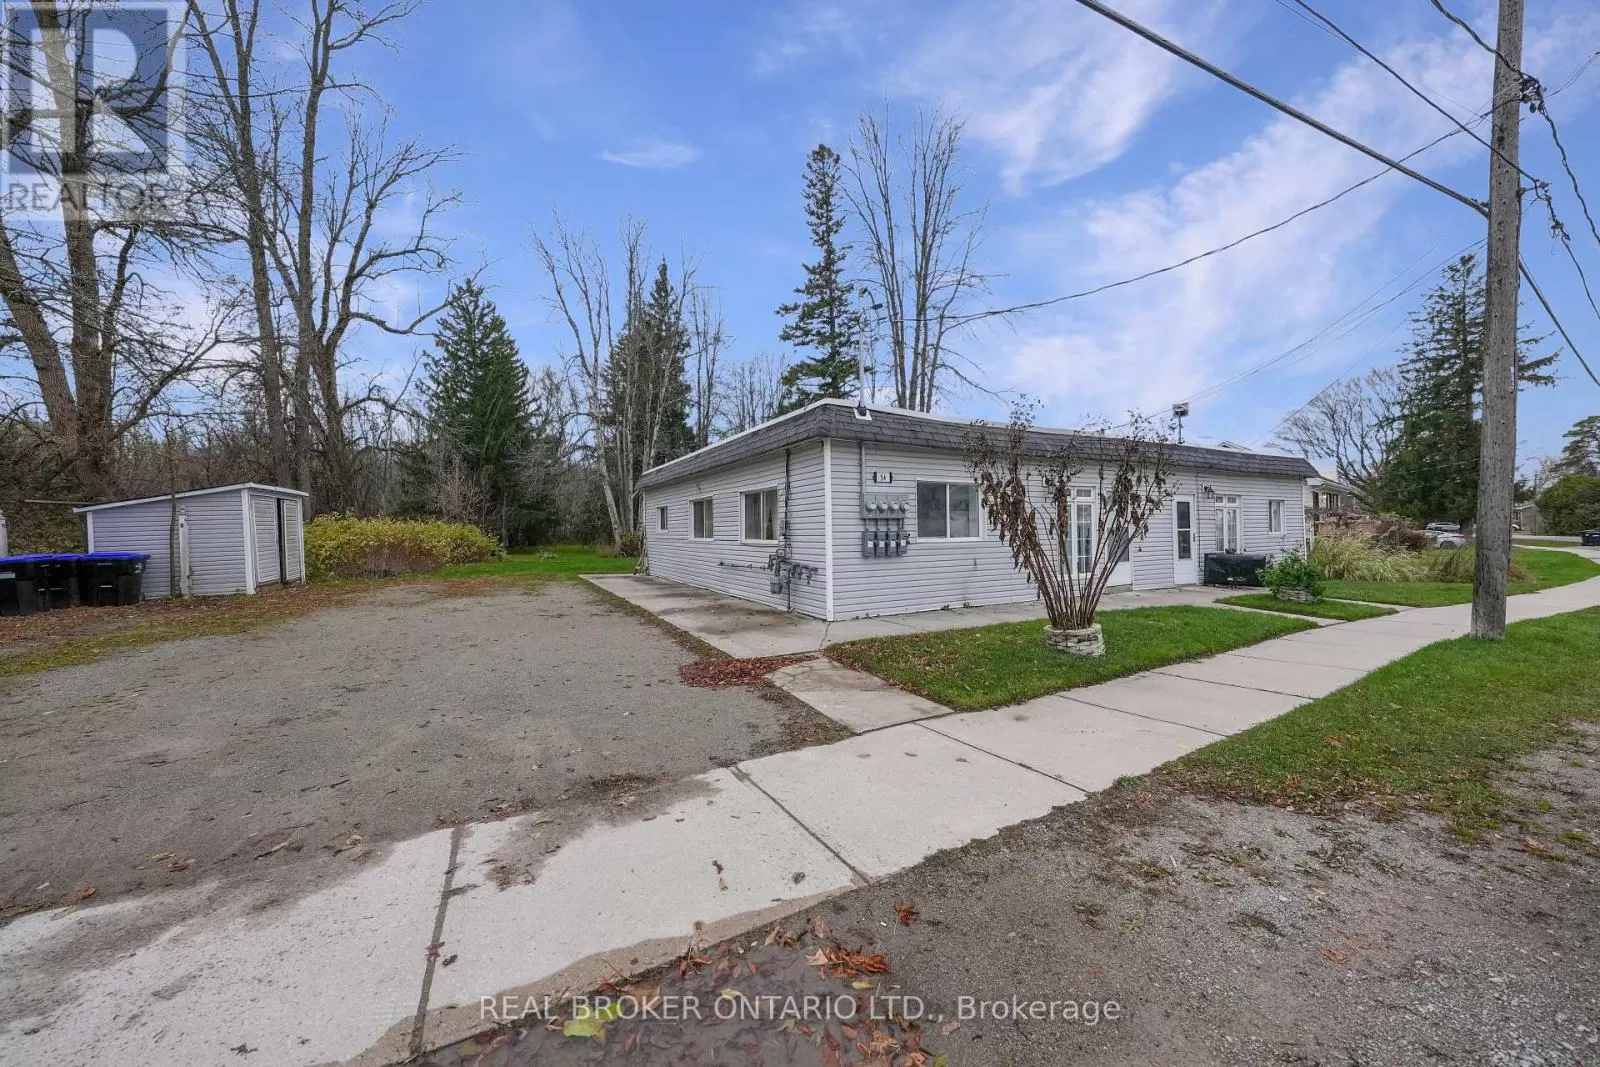 Fourplex for rent: 54 Coldwater Rd, Tay, Ontario L0K 2C0